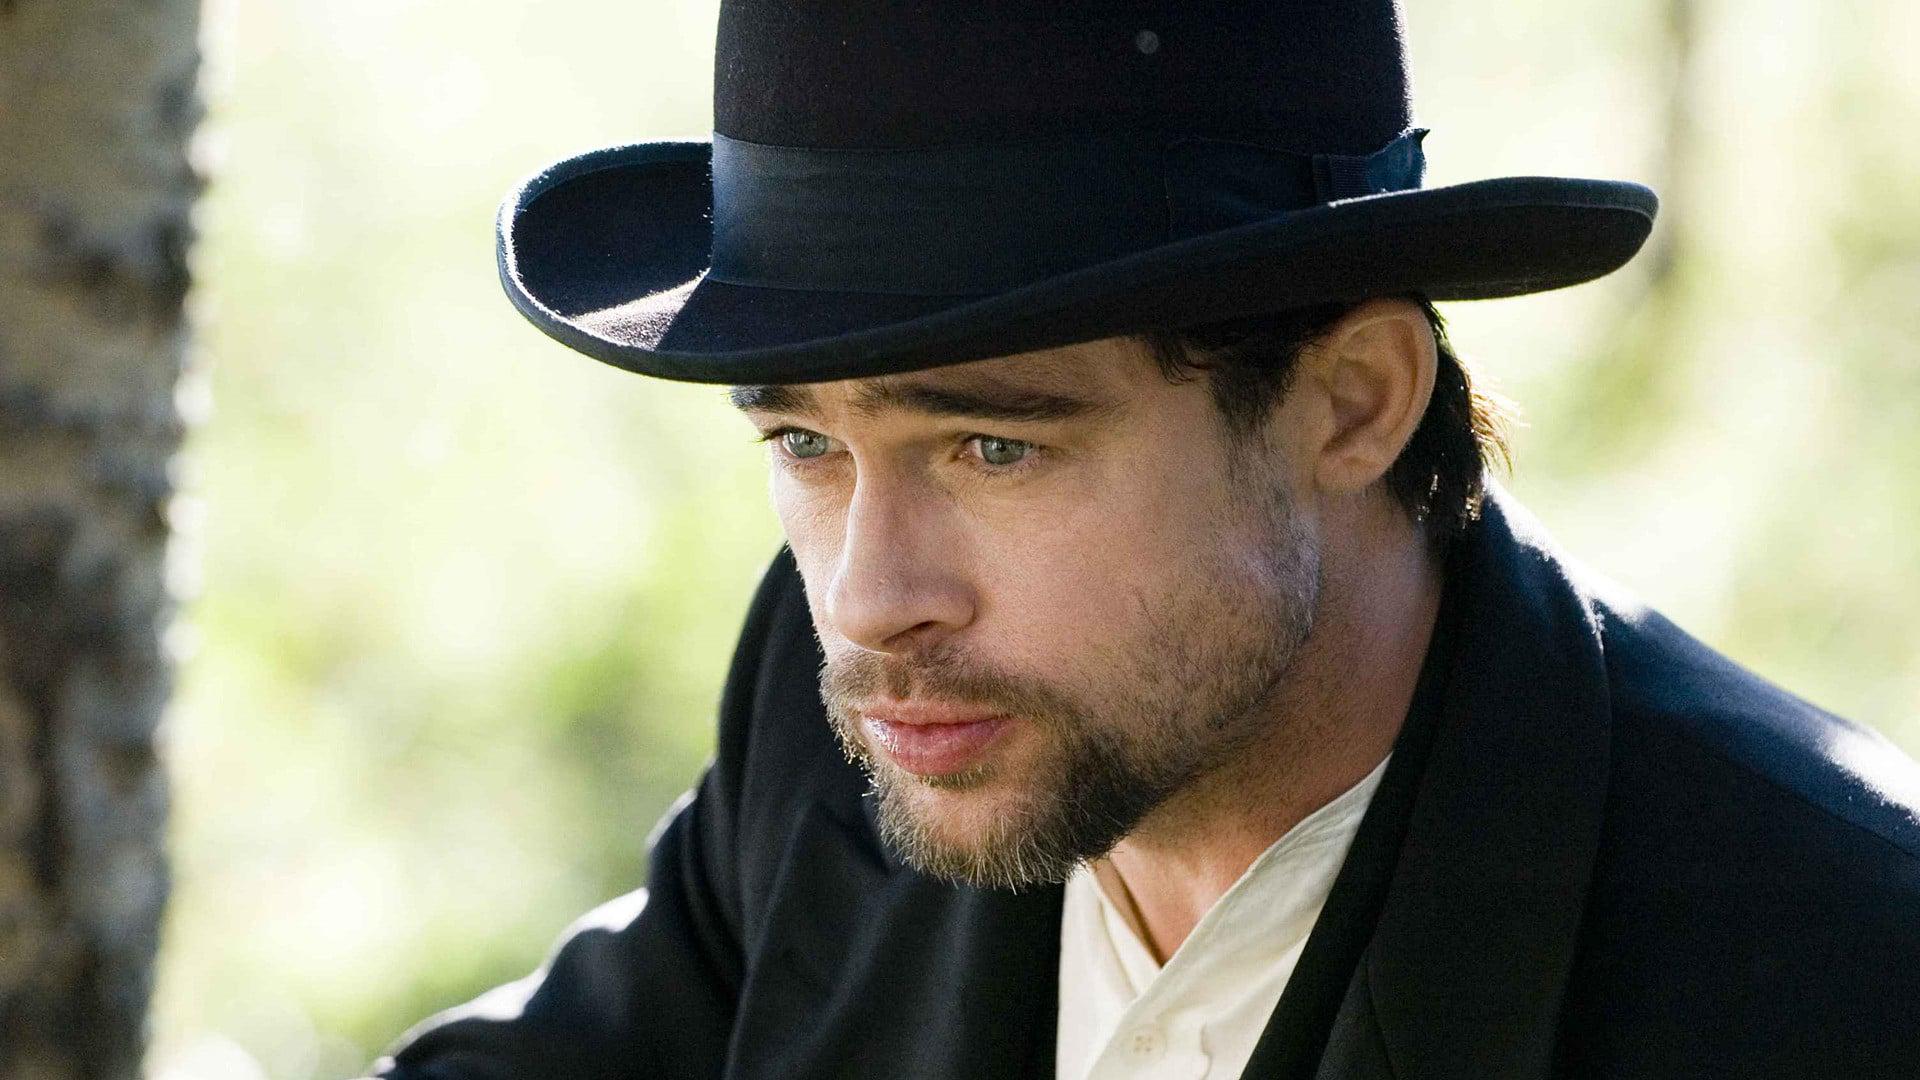 Backdrop Image for The Assassination of Jesse James by the Coward Robert Ford